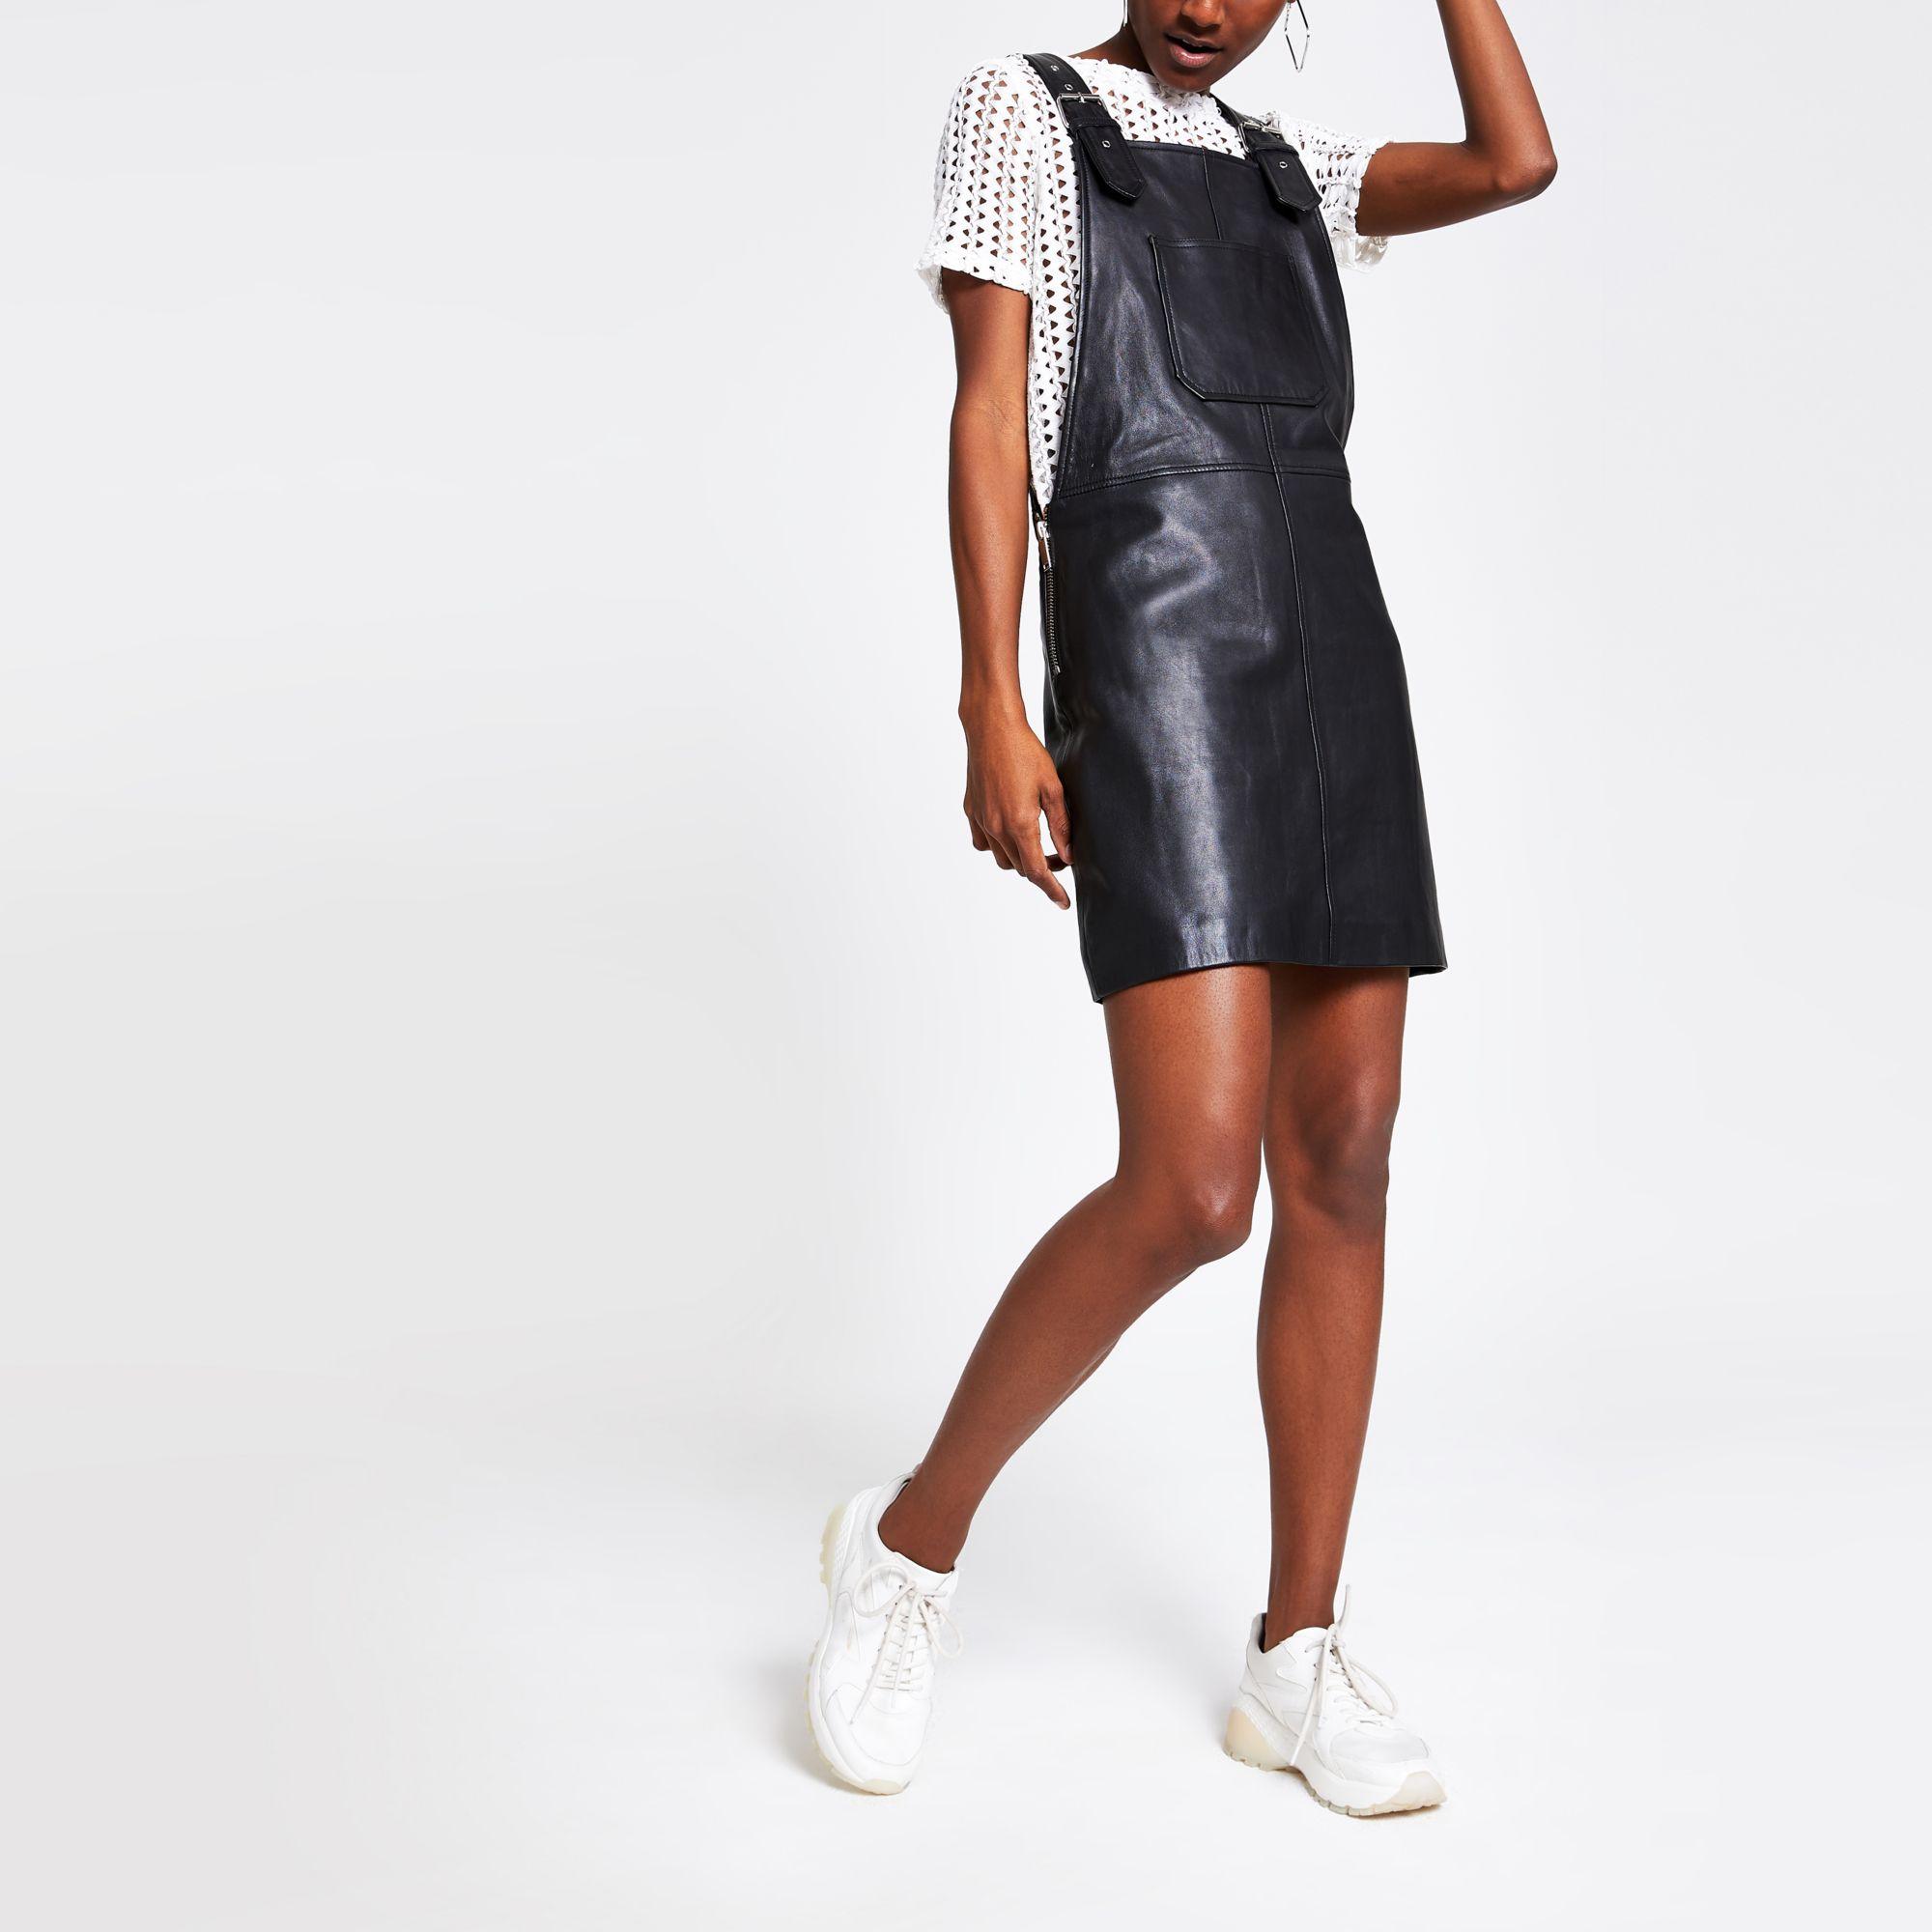 River Island Leather Pinafore Dress in Black - Lyst